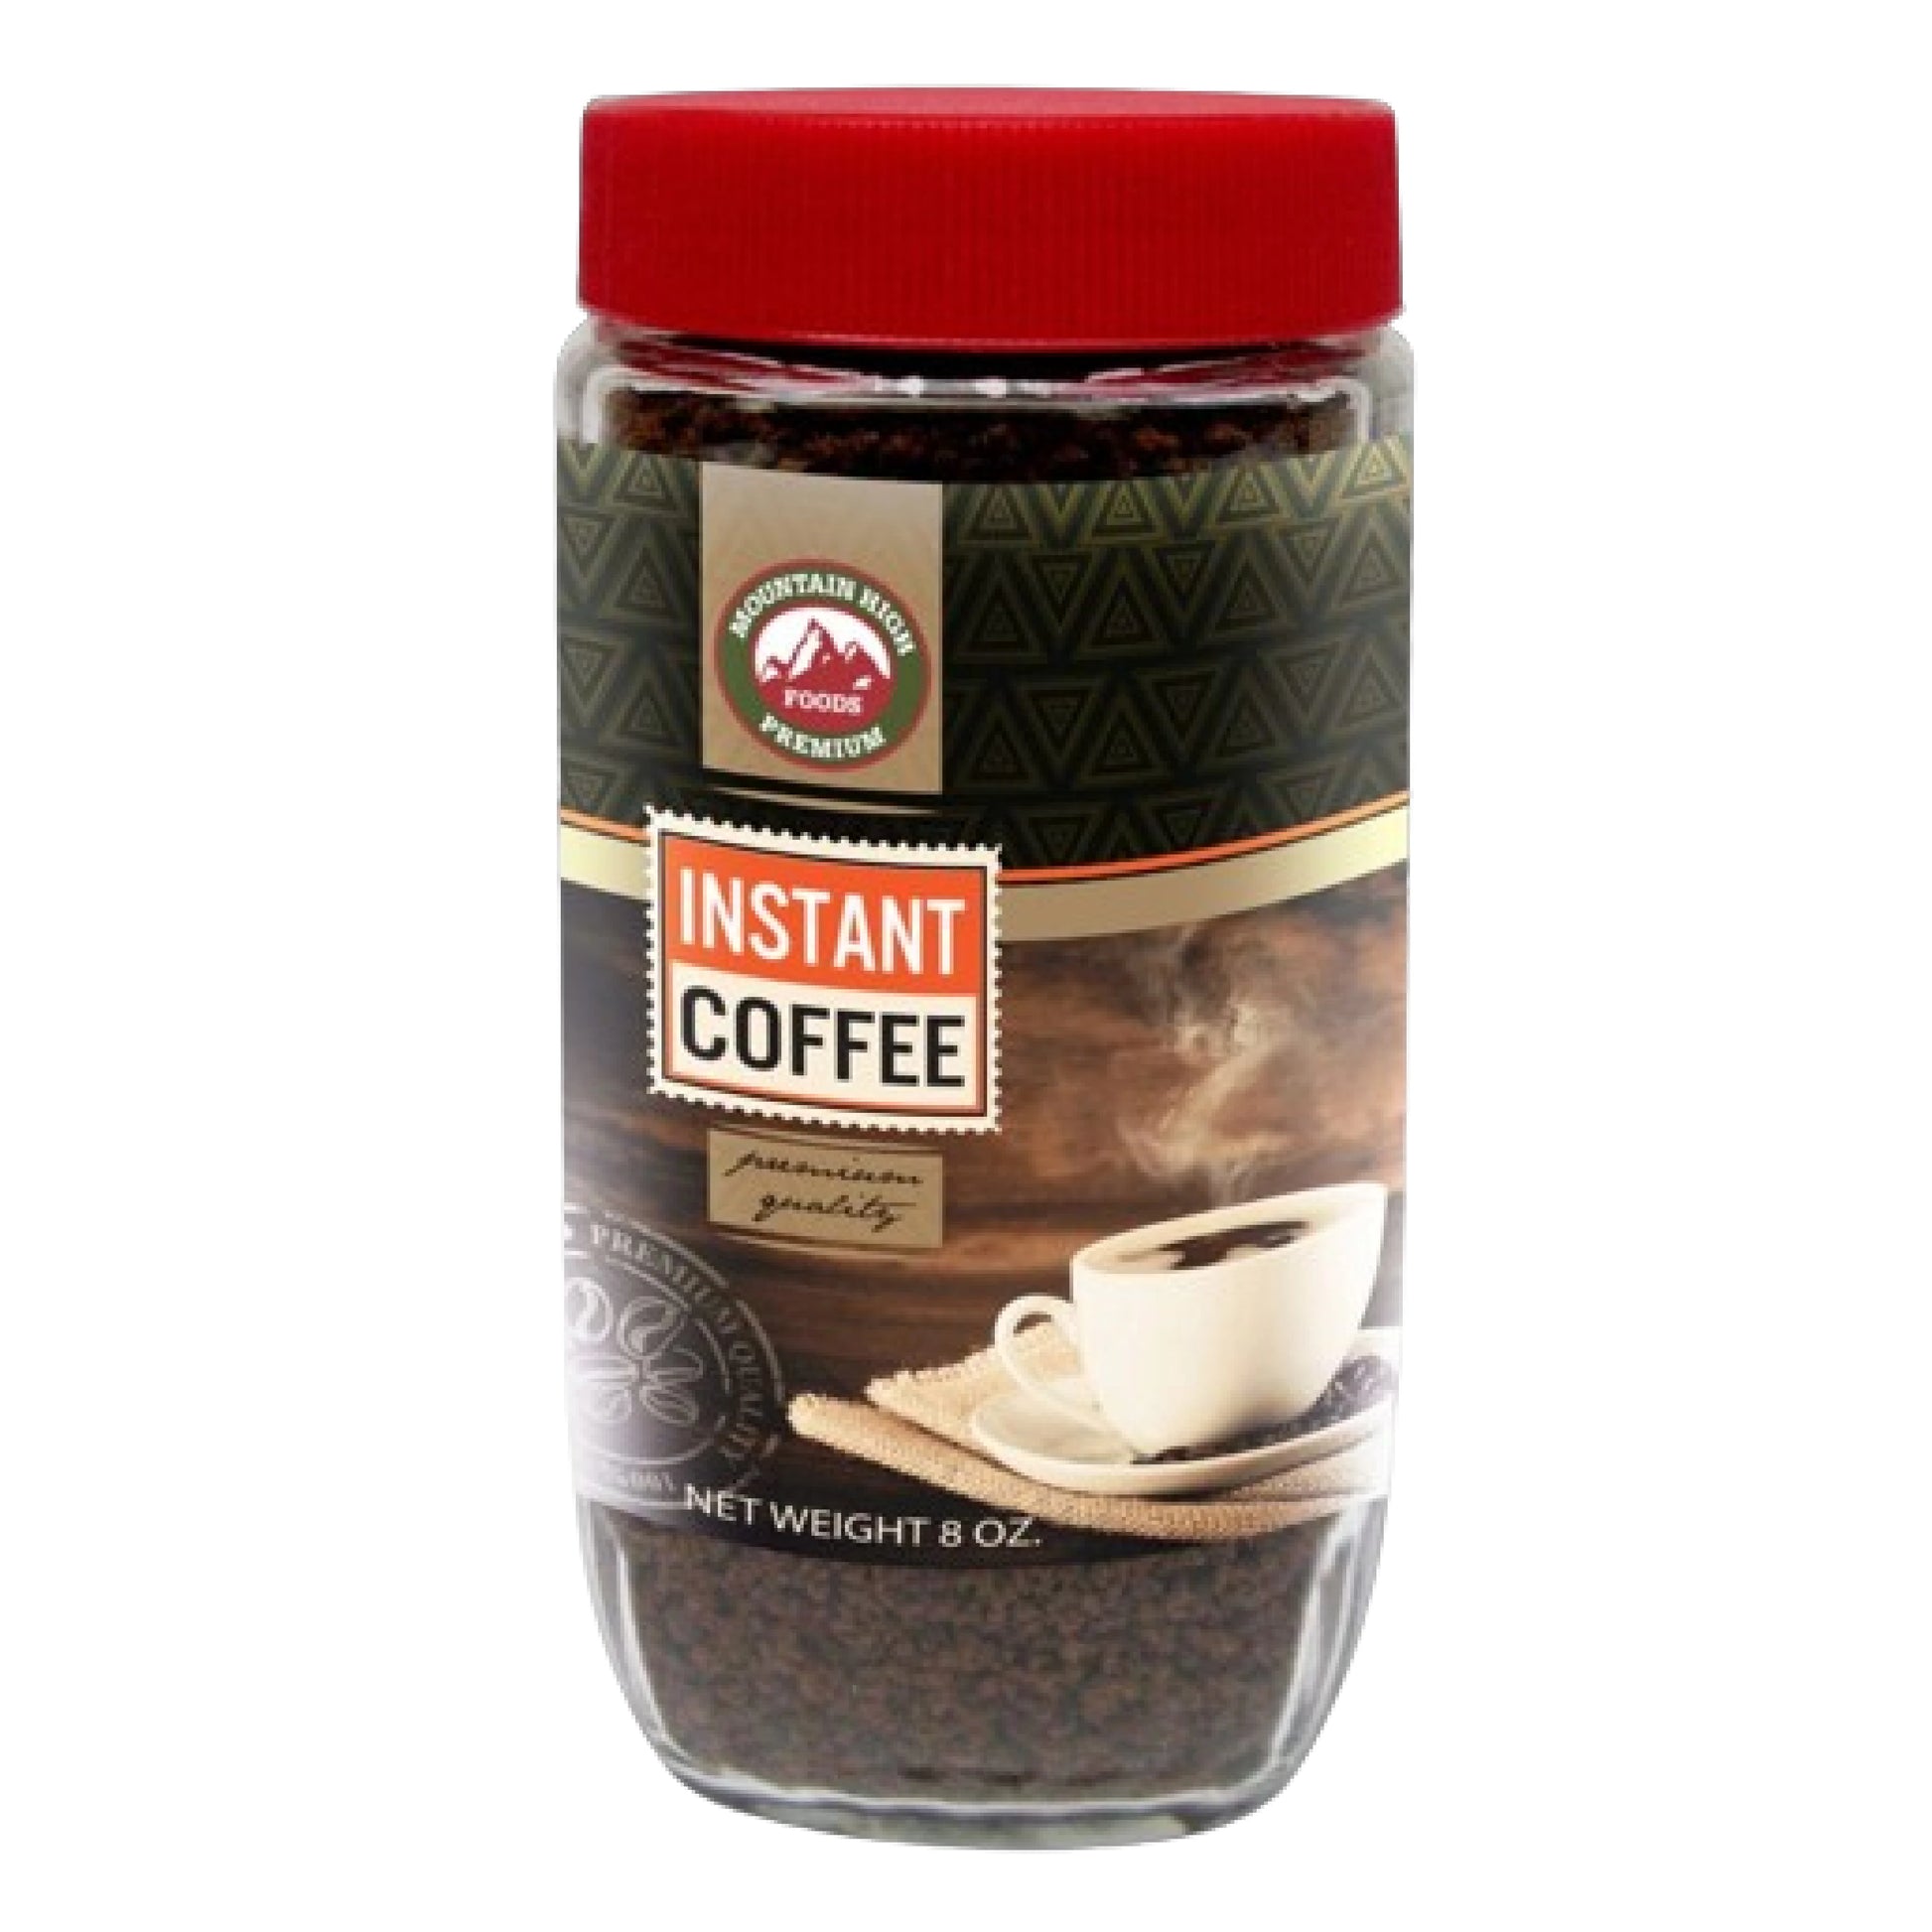 Mountain High Instant Coffee 8oz 12 Count